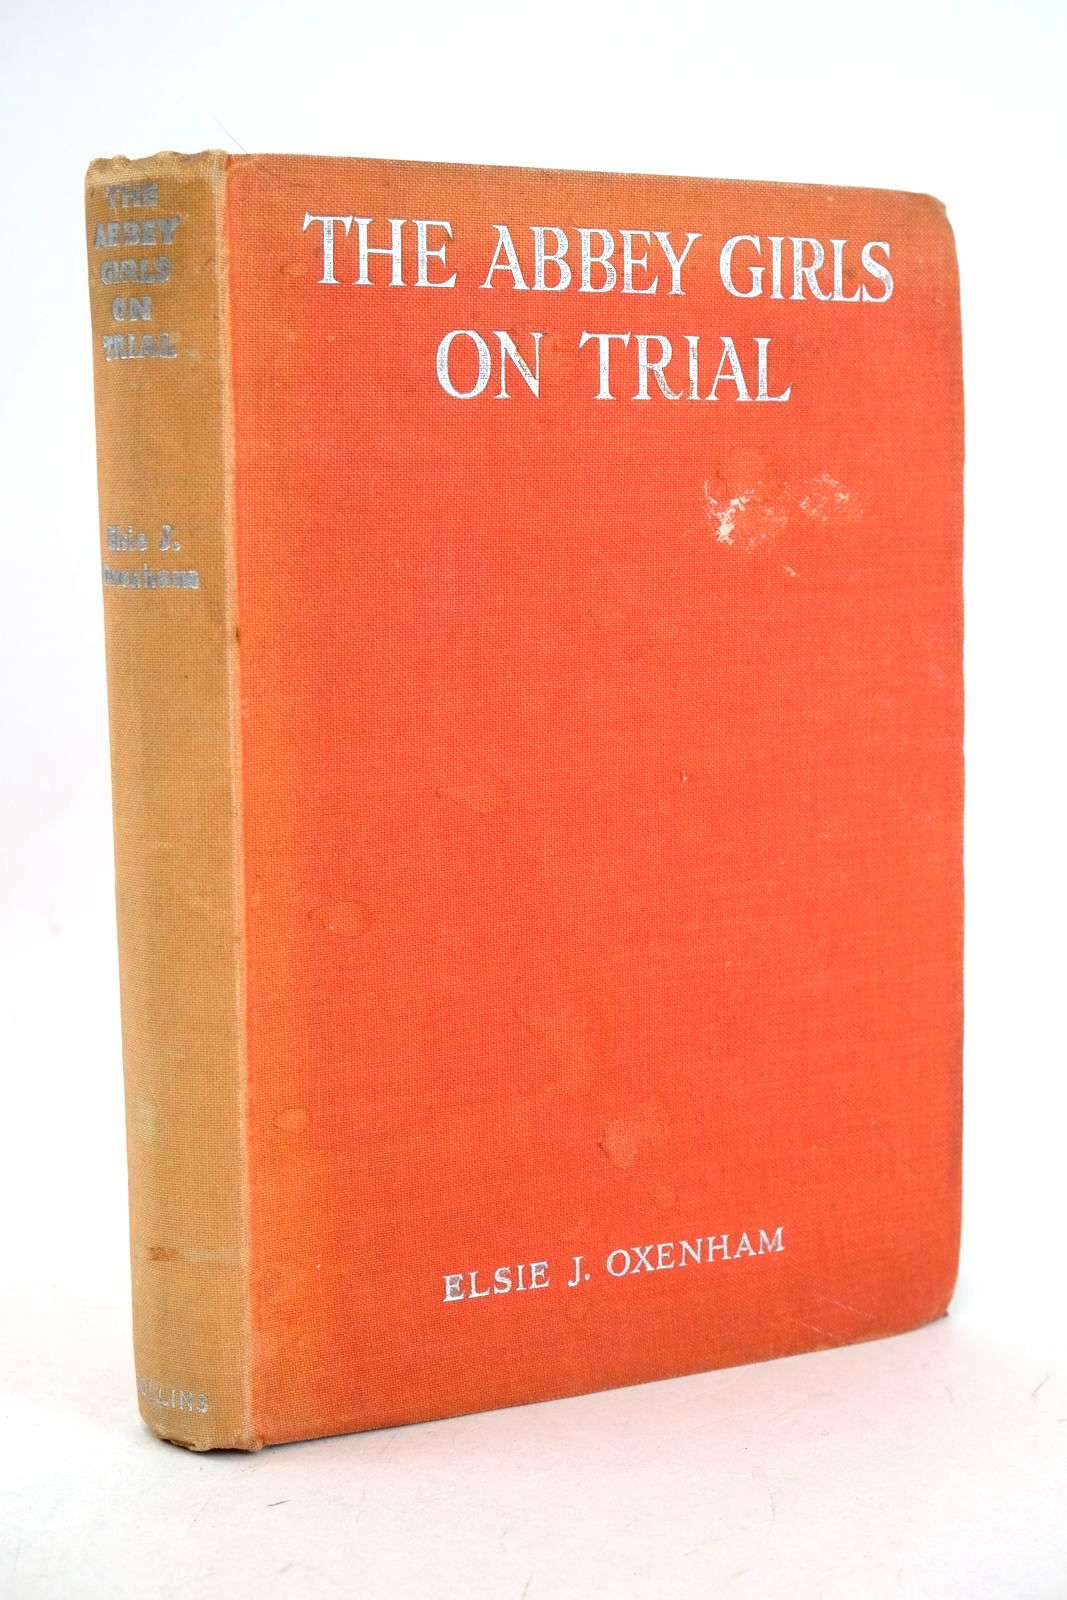 Photo of THE ABBEY GIRLS ON TRIAL written by Oxenham, Elsie J. published by Collins (STOCK CODE: 1327257)  for sale by Stella & Rose's Books